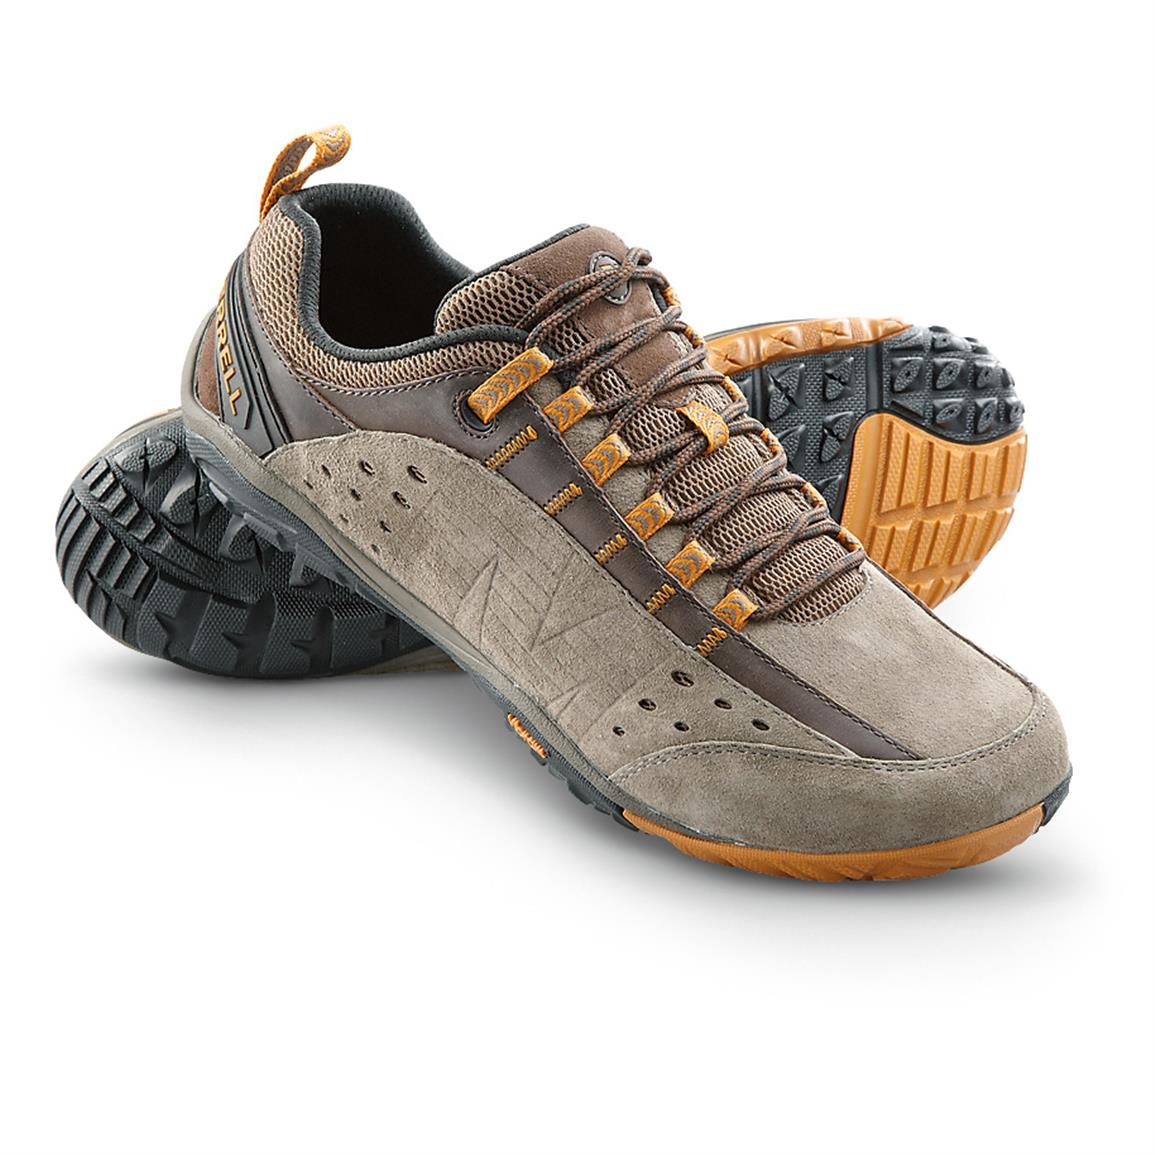 Merrell Cypher Glove Hiker Shoes - 615209, Hiking Boots & Shoes at ...